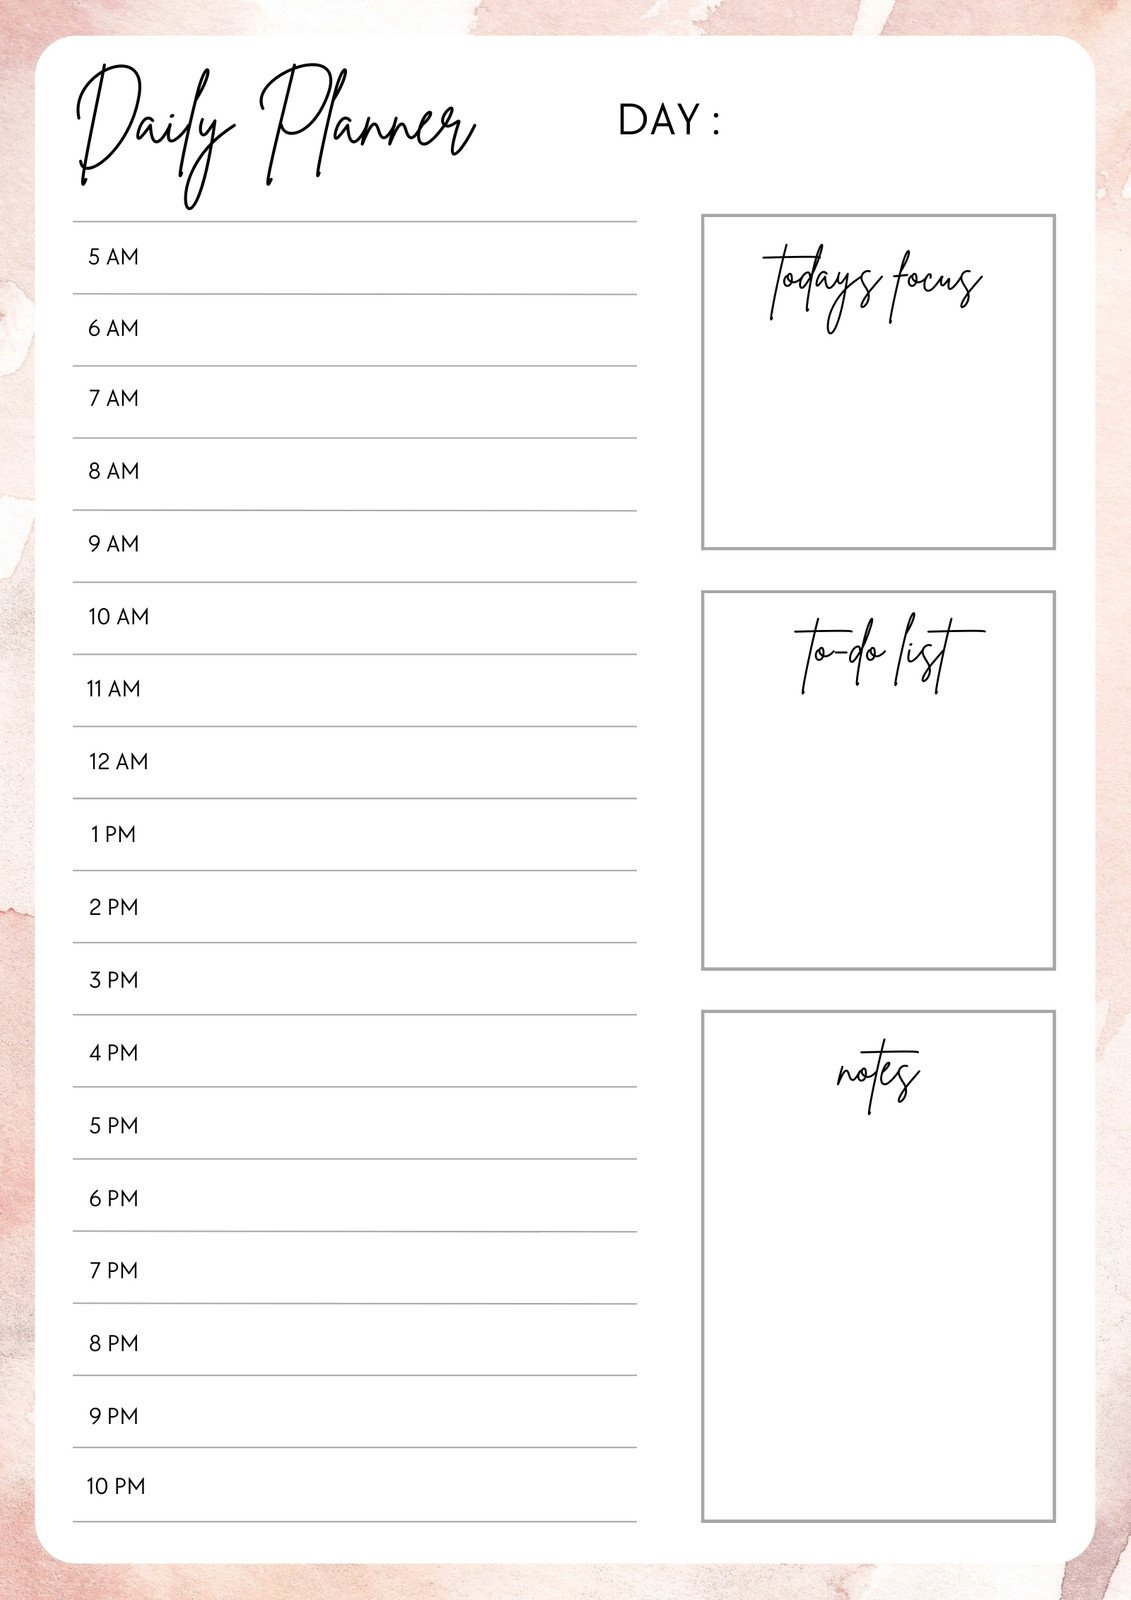 Page 10 - Free daily planner templates to customize | Canva